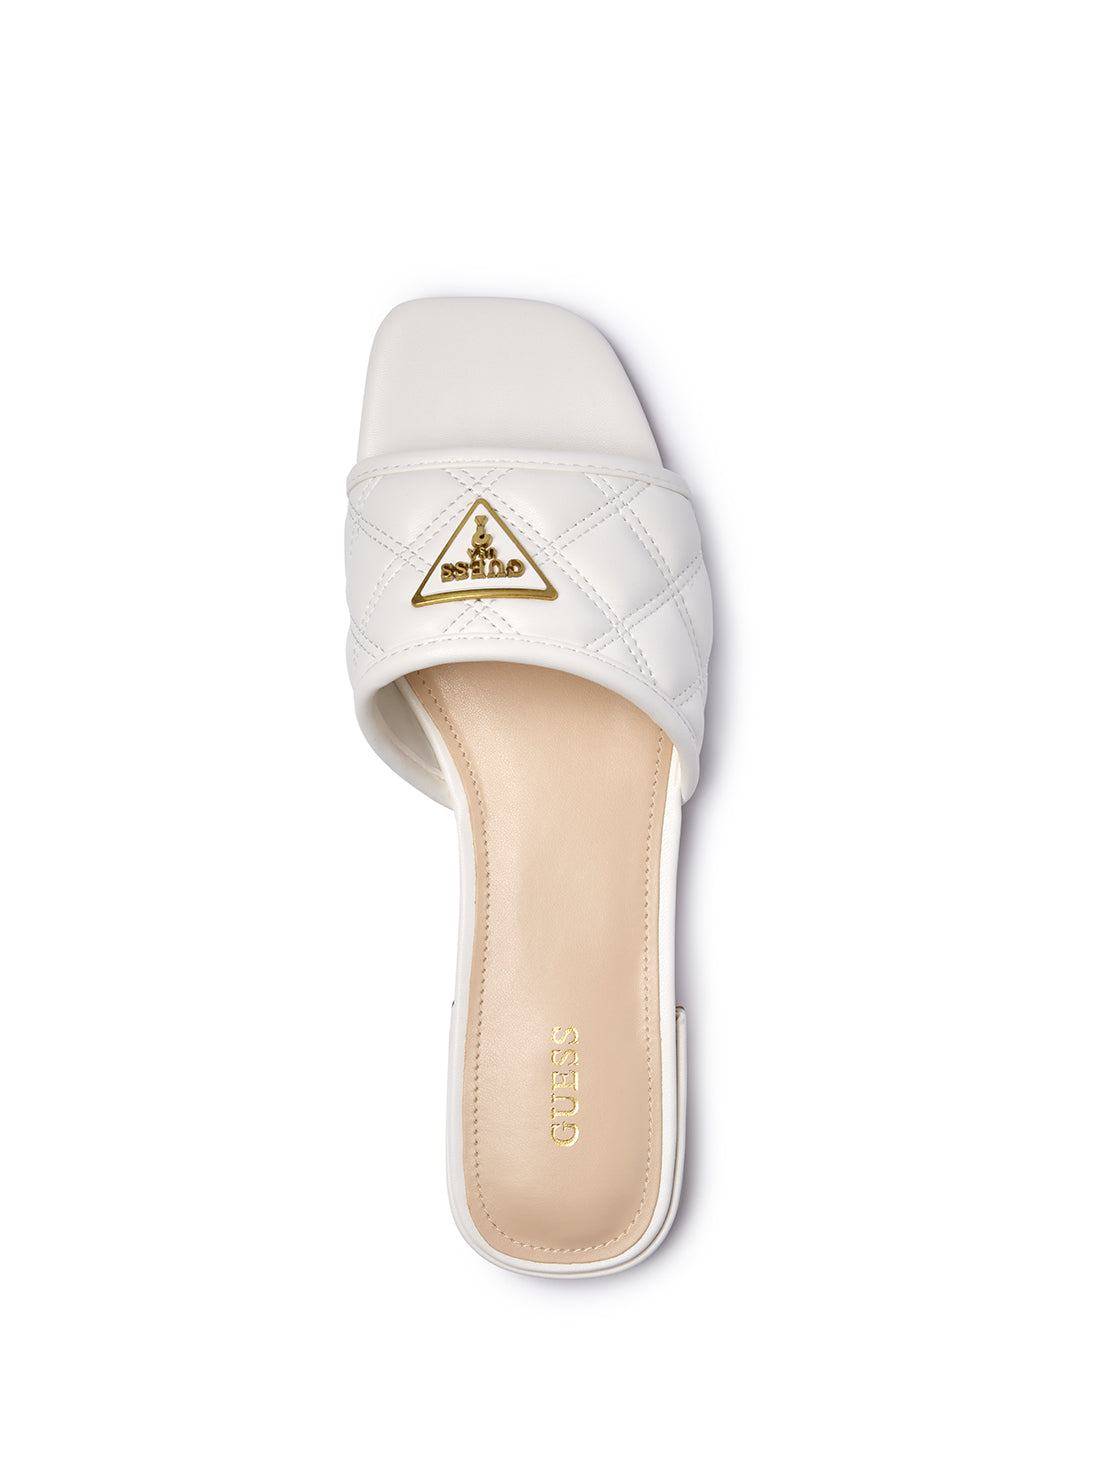 GUESS Women's White Tameli Quilted Sandals TAMELI Top View